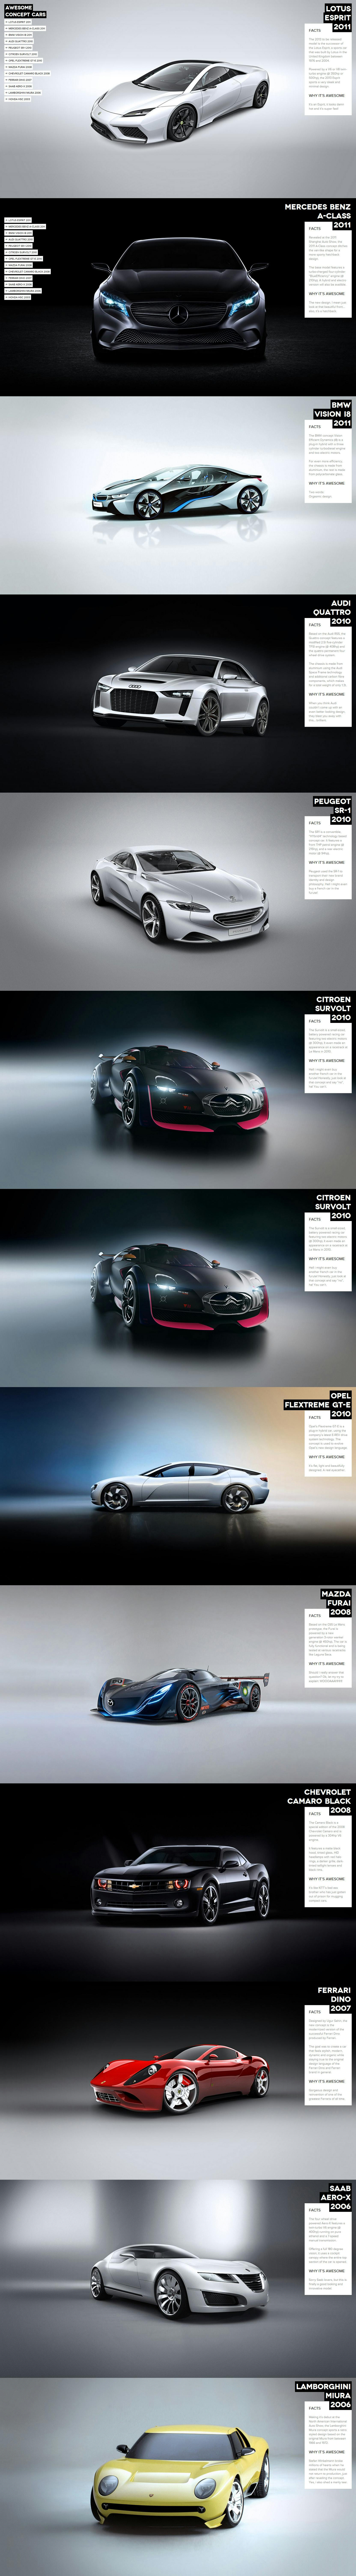 Awesome Concept Cars Website Screenshot